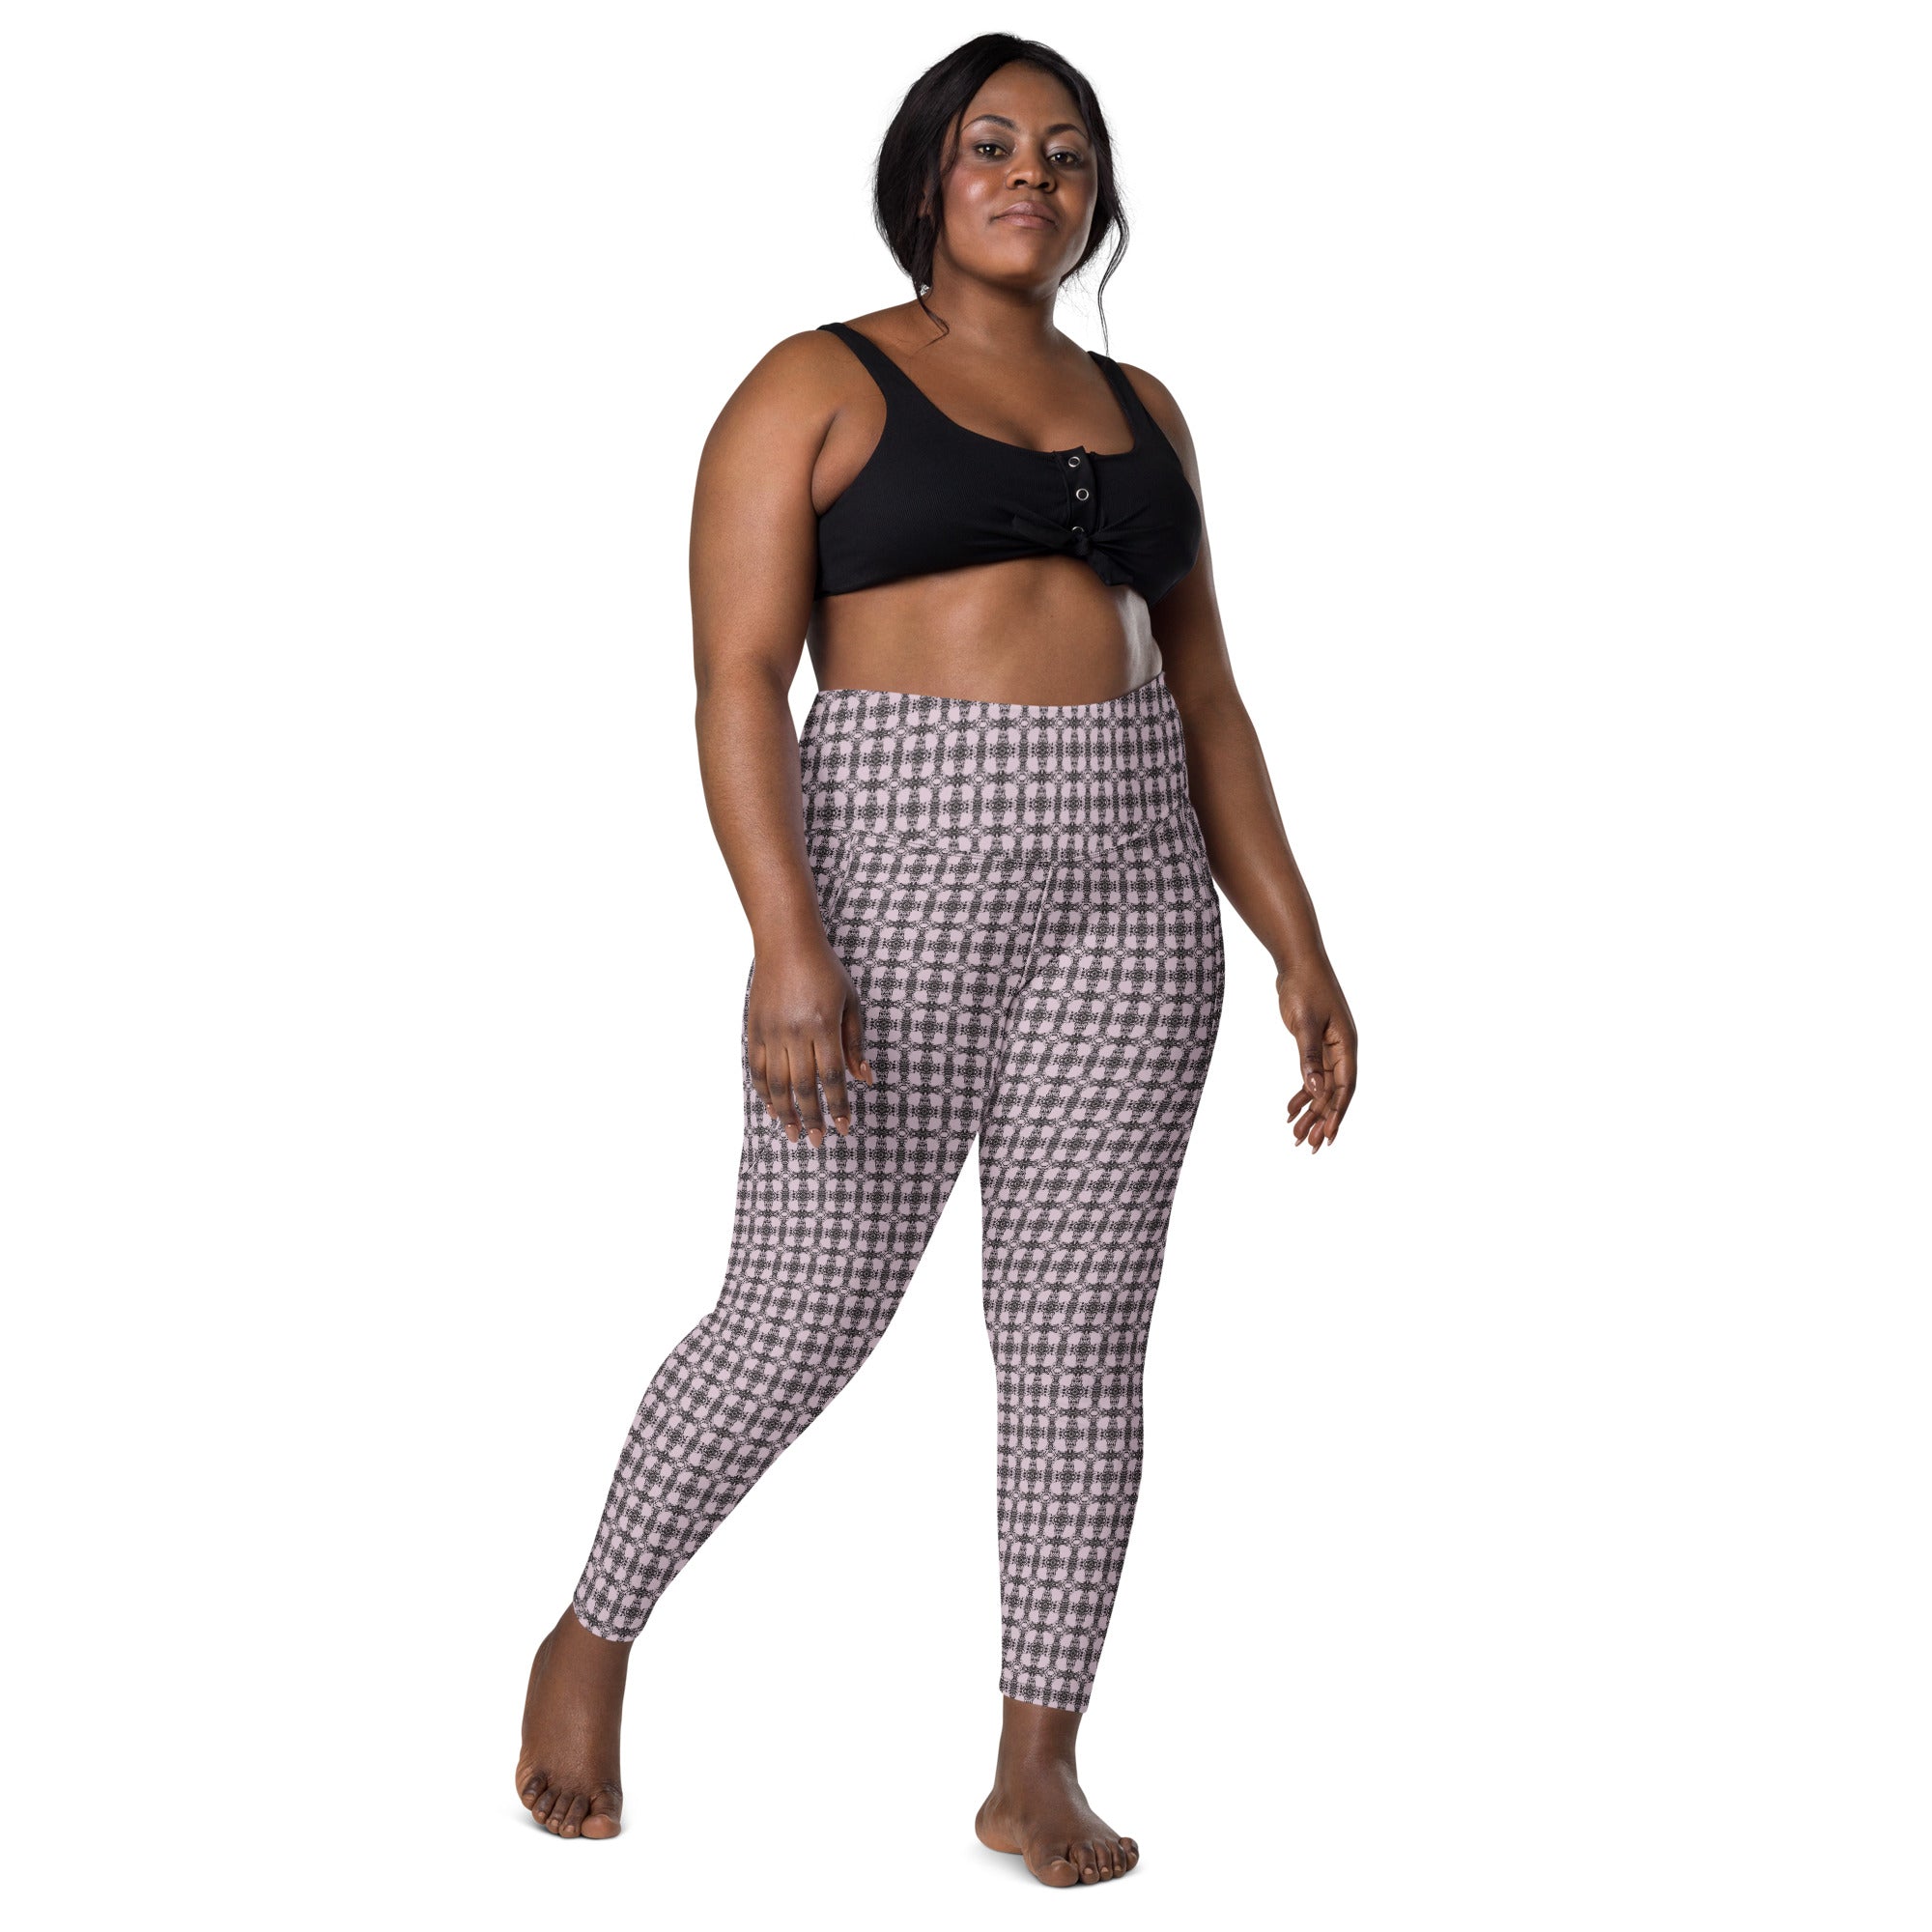 Texture Pattern Leggings with Pockets - Opera Bound